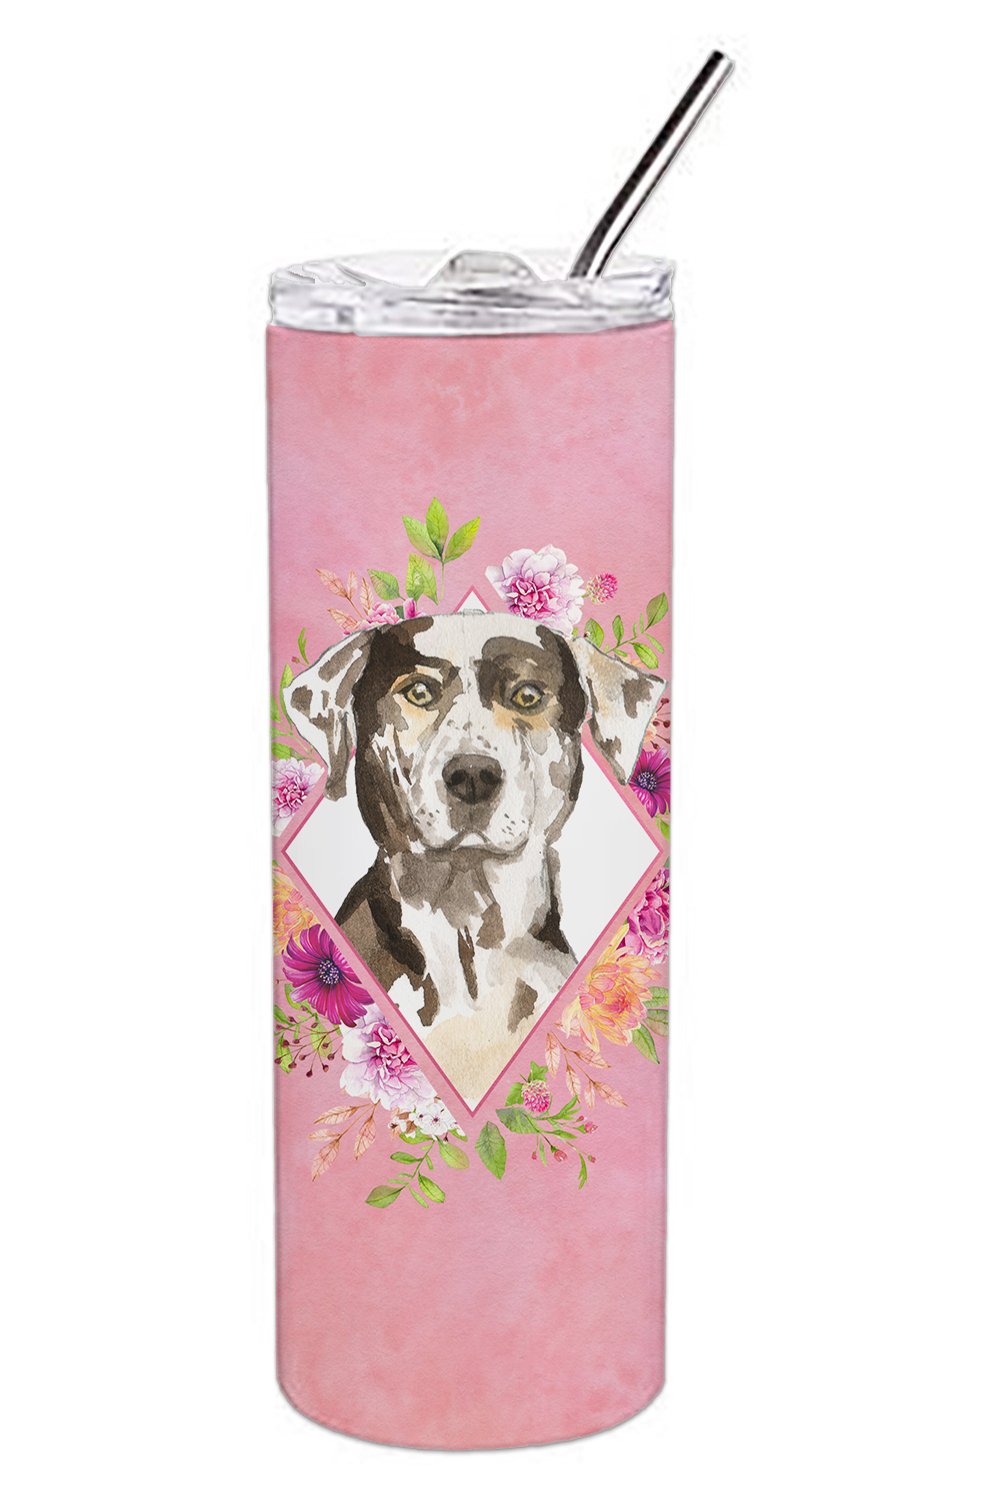 Catahoula Leopard Dog Pink Flowers Double Walled Stainless Steel 20 oz Skinny Tumbler CK4249TBL20 by Caroline's Treasures